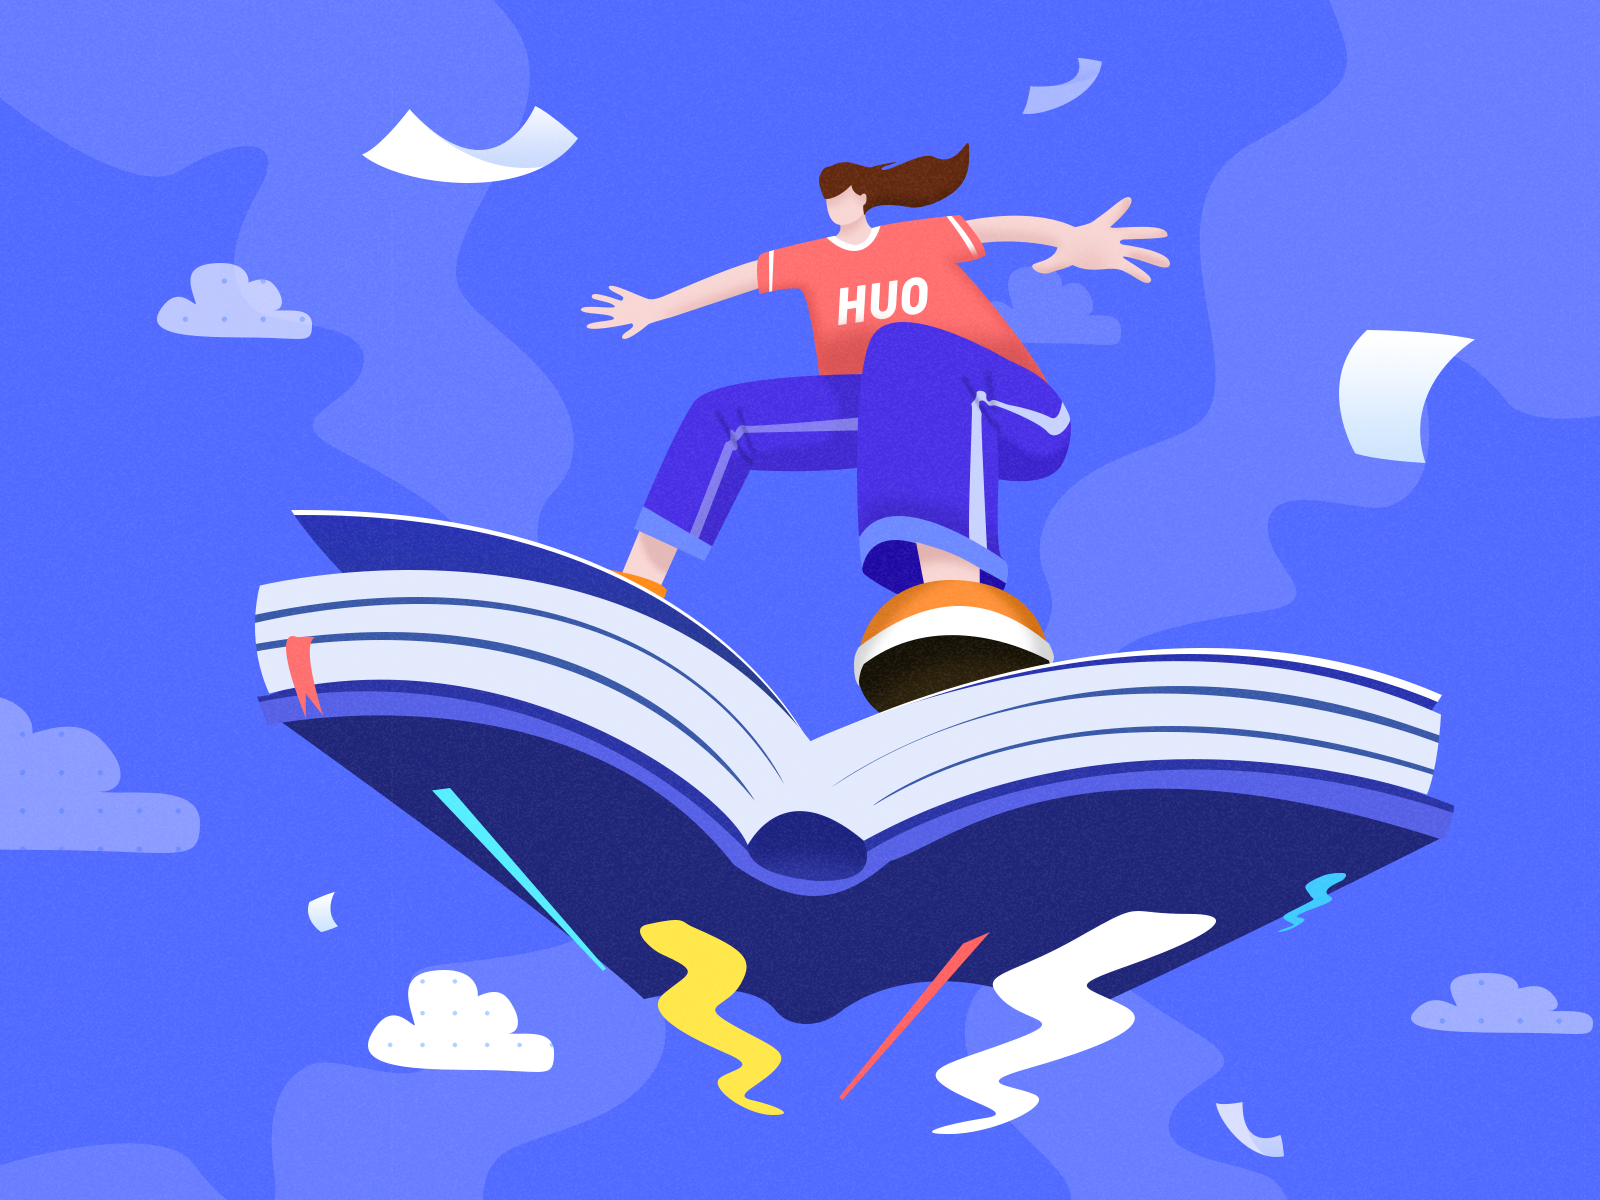 Fly illustration by HUO on Dribbble